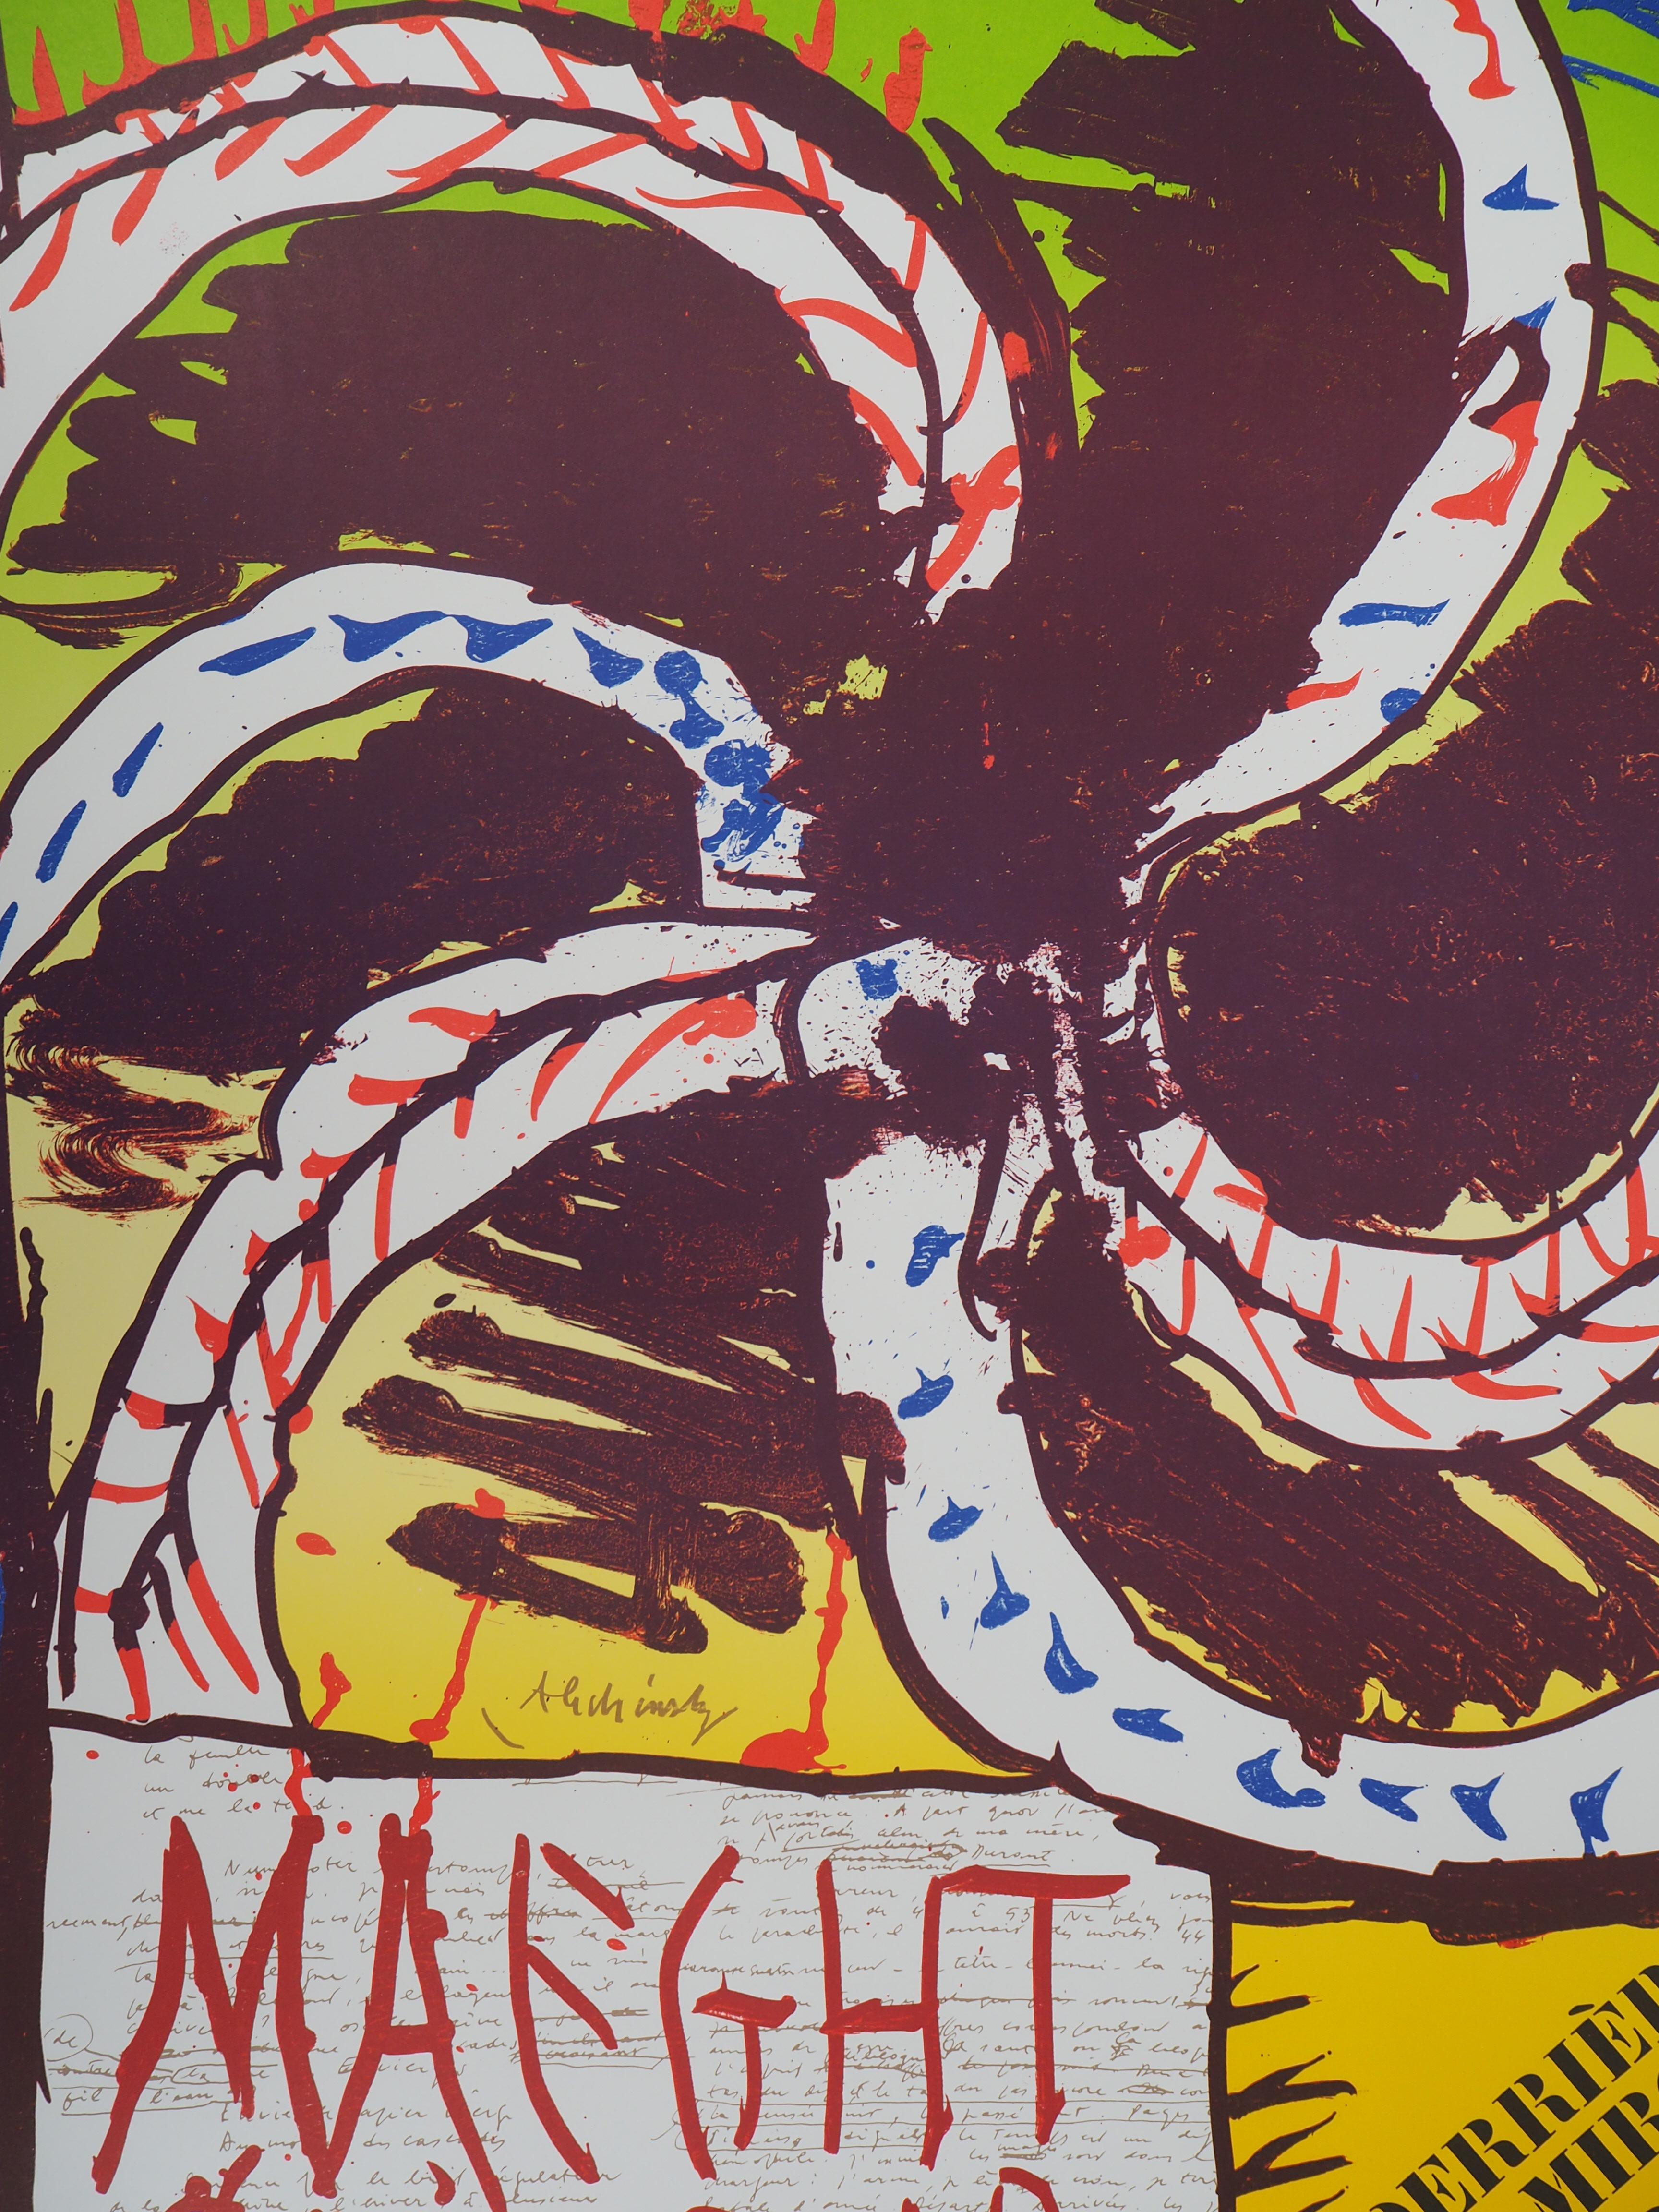 The Wheel (Maeght) - Vintage Lithograph Poster, 1982 - Abstract Print by Pierre Alechinsky 